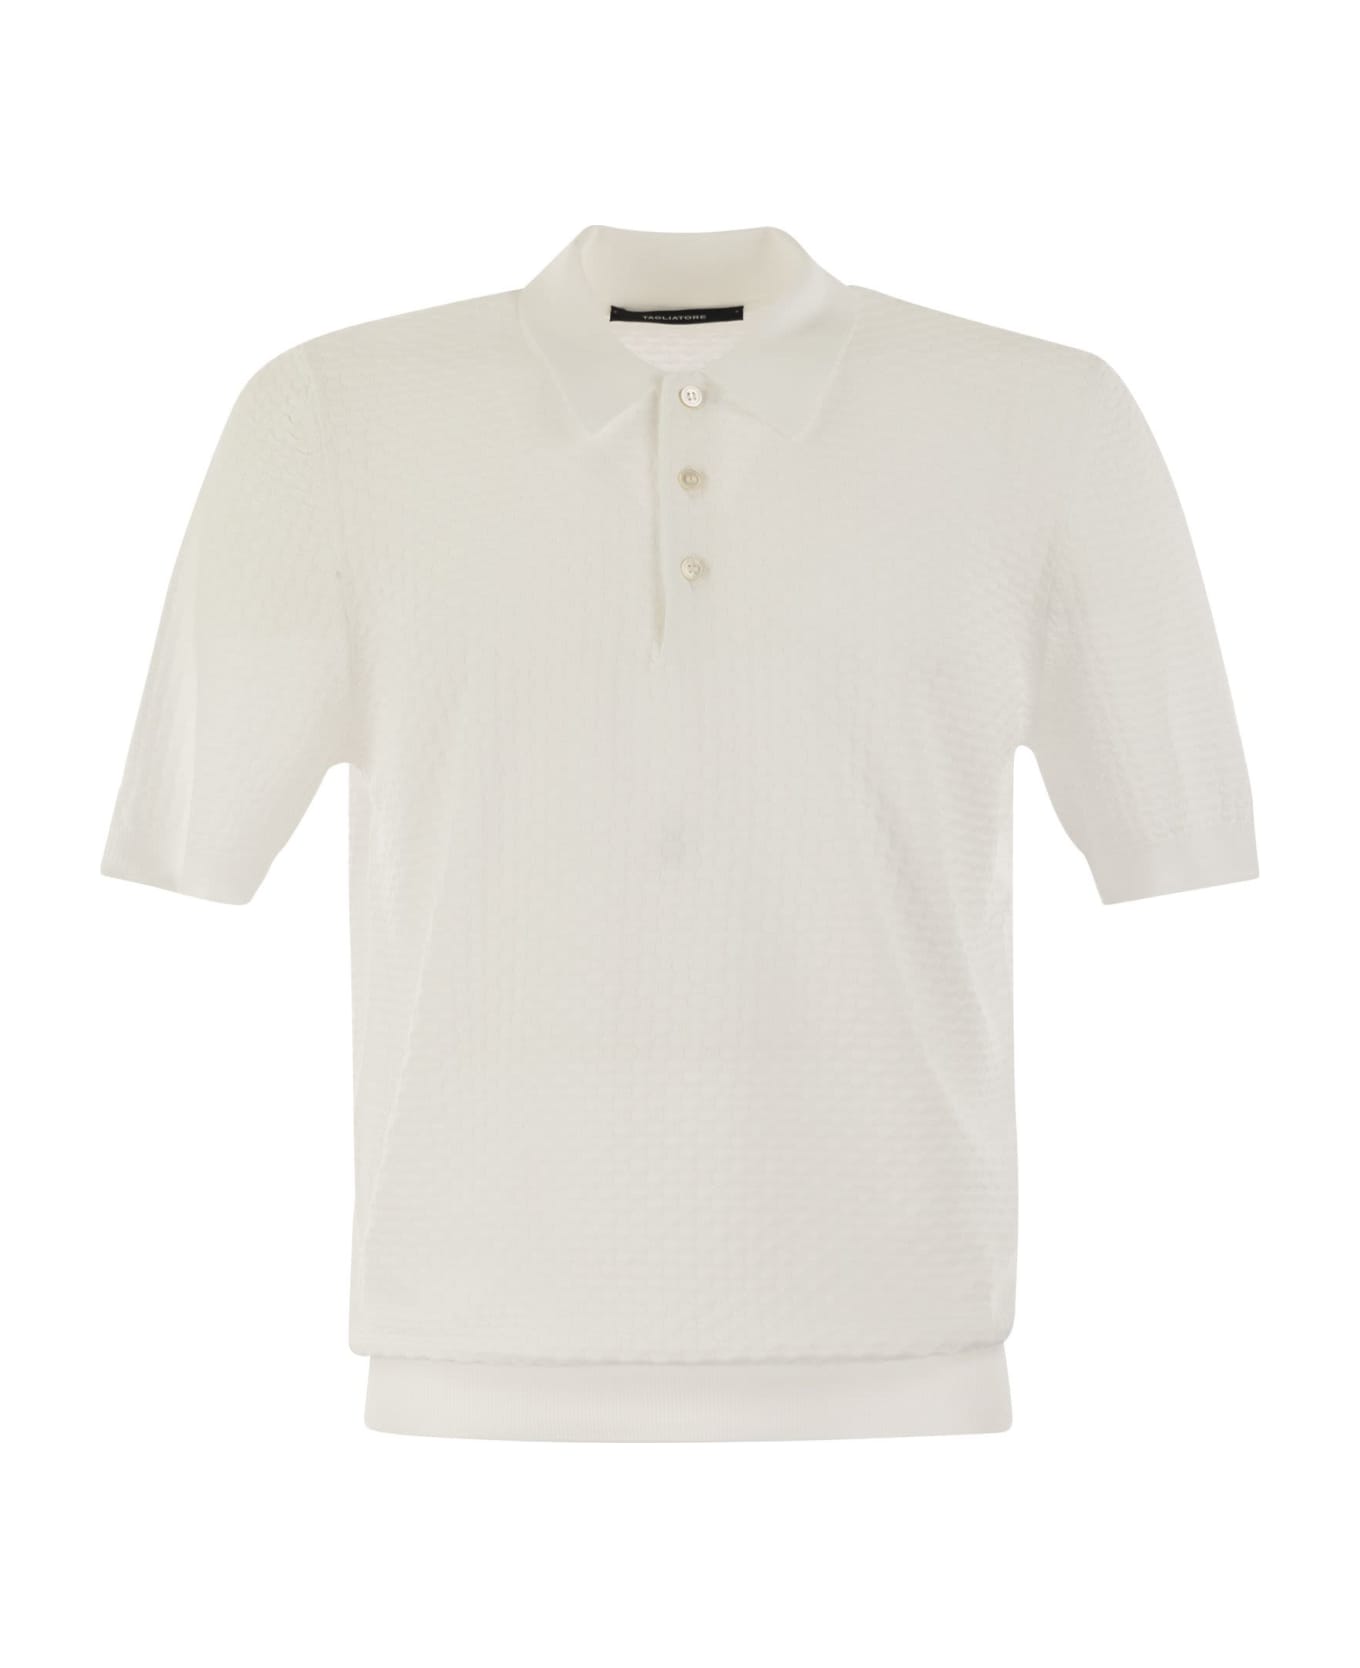 Tagliatore Knitted Cotton Polo Shirt - White ポロシャツ